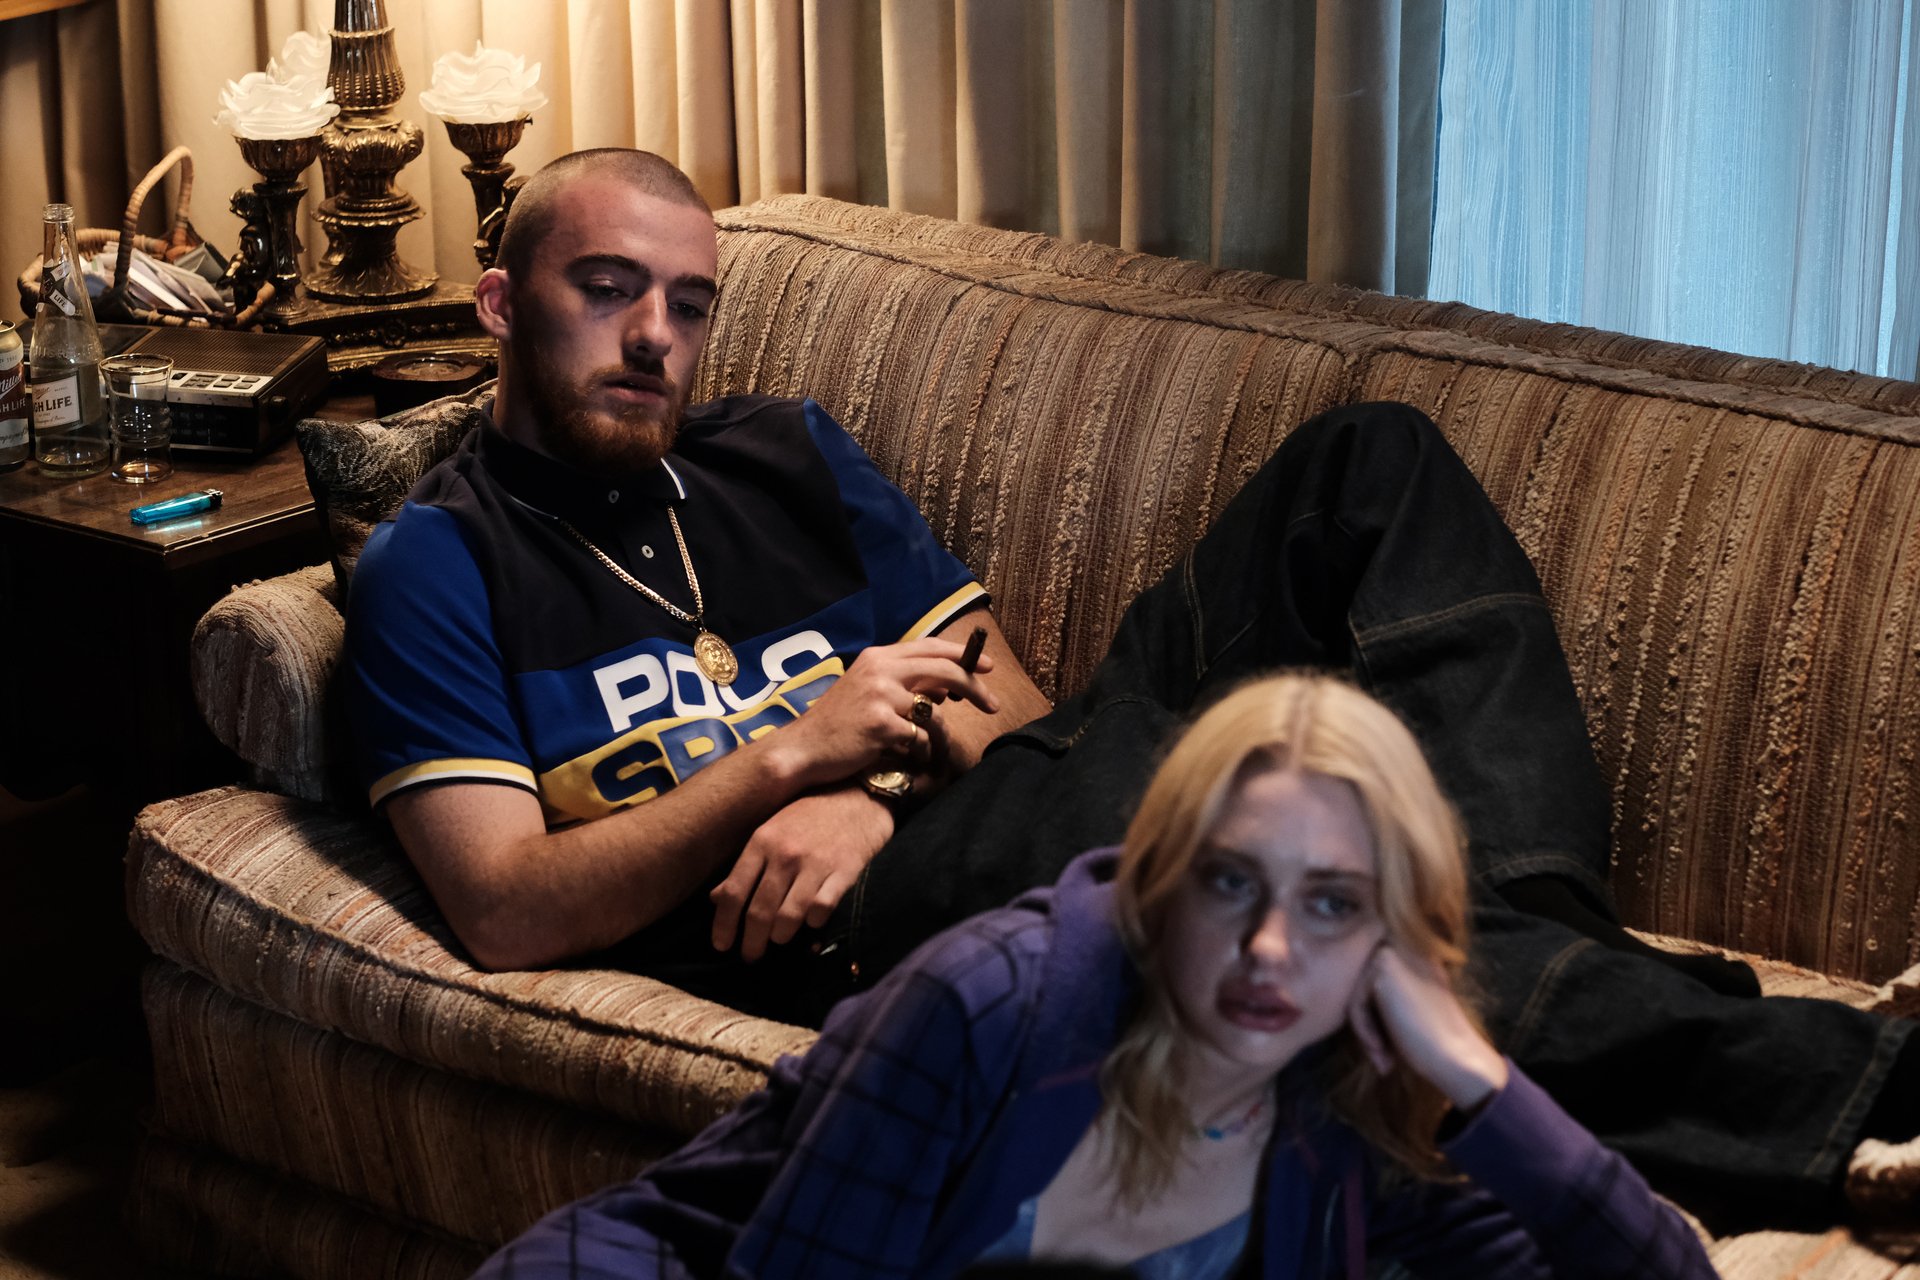 Angus Cloud as Fez and Chloe Cherry as Faye lying on and in front of a couch in 'Euphoria' Season 2